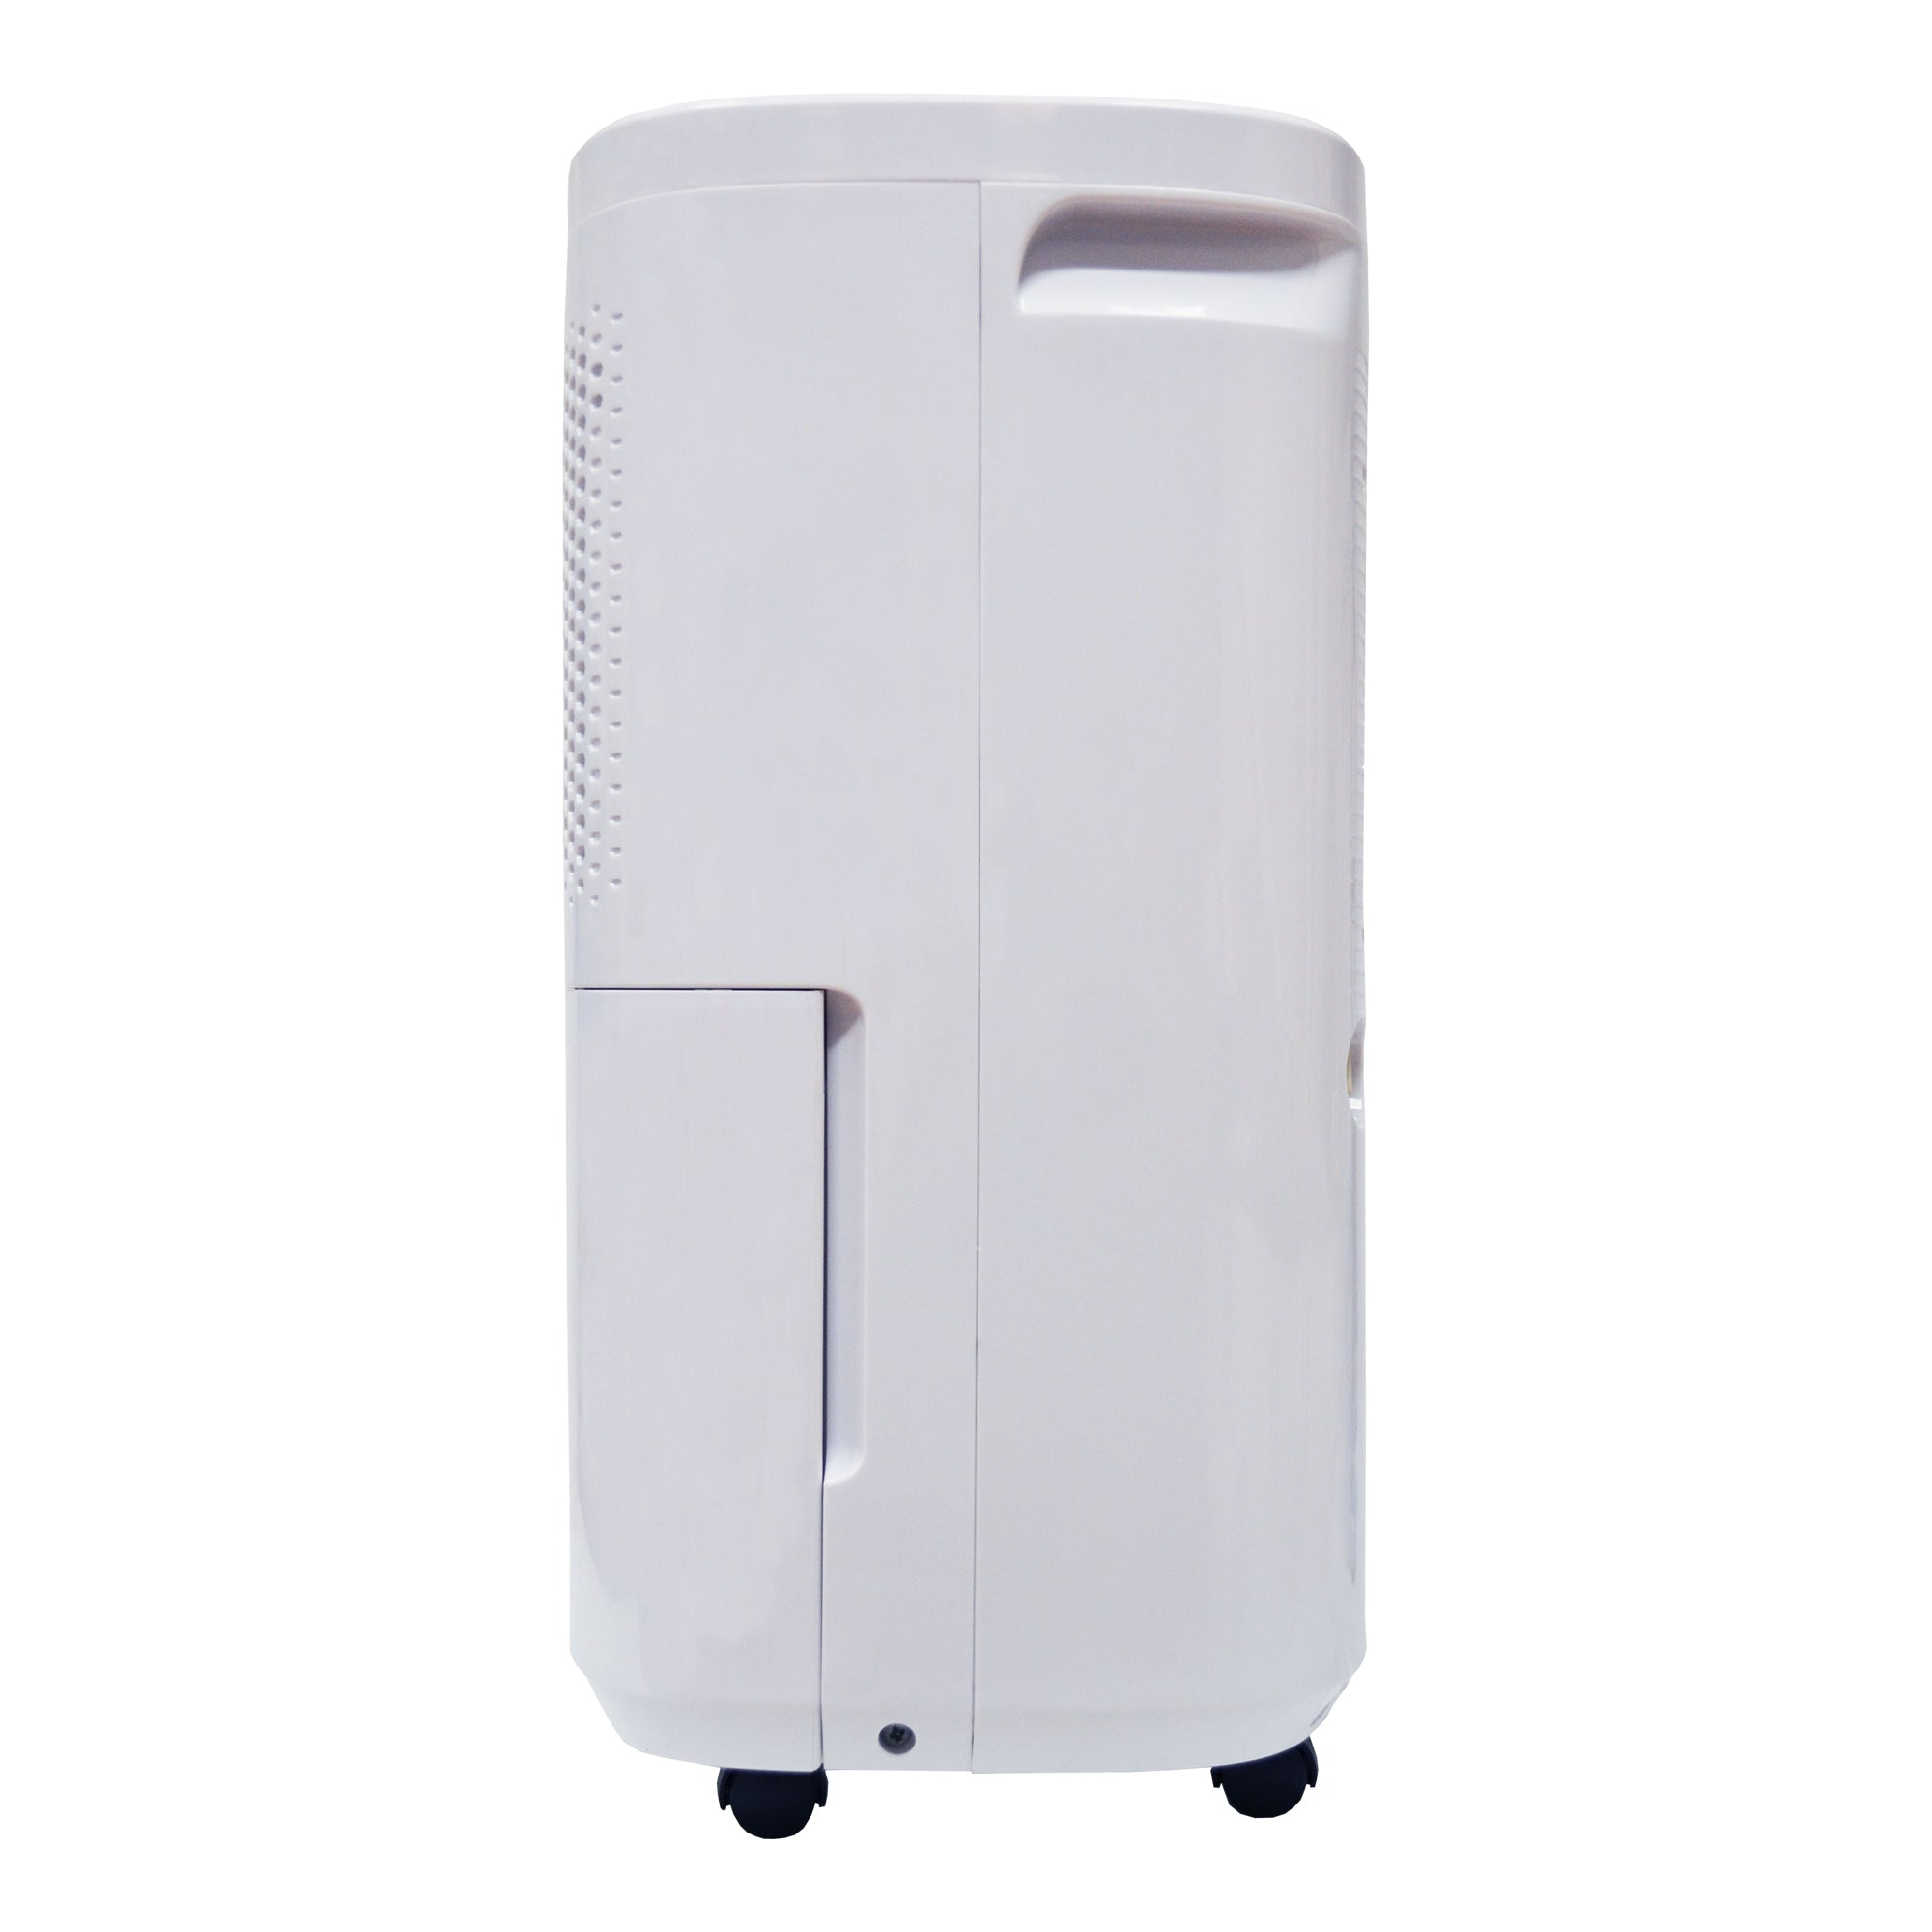 Portable Dehumidifier, Extracts 12 Litres per Day